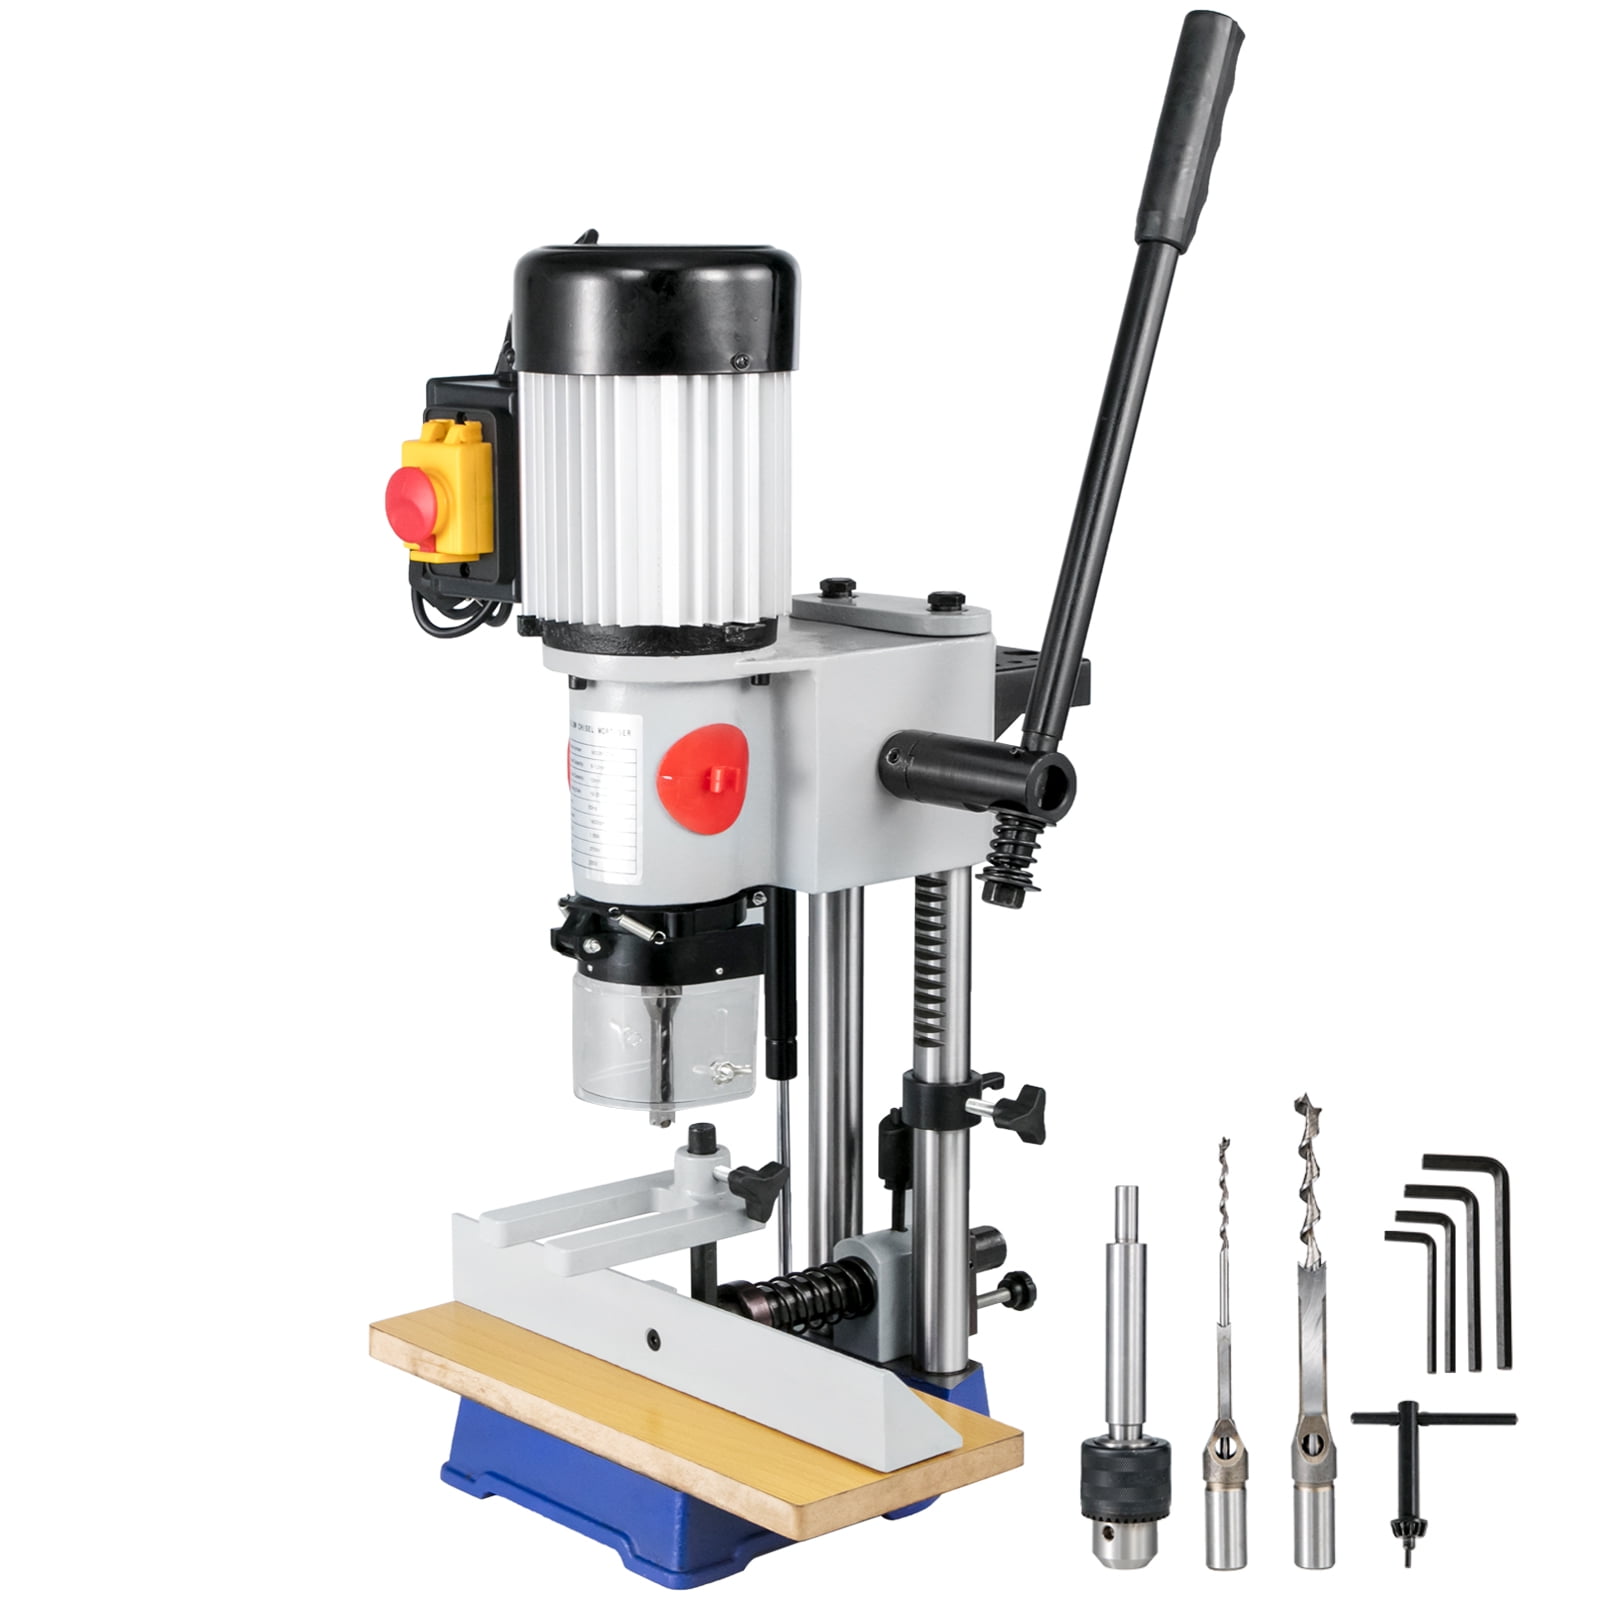 Benchtop Mortise Machine Powermatic Mortiser With Cast-Iron Base For Woodworking 